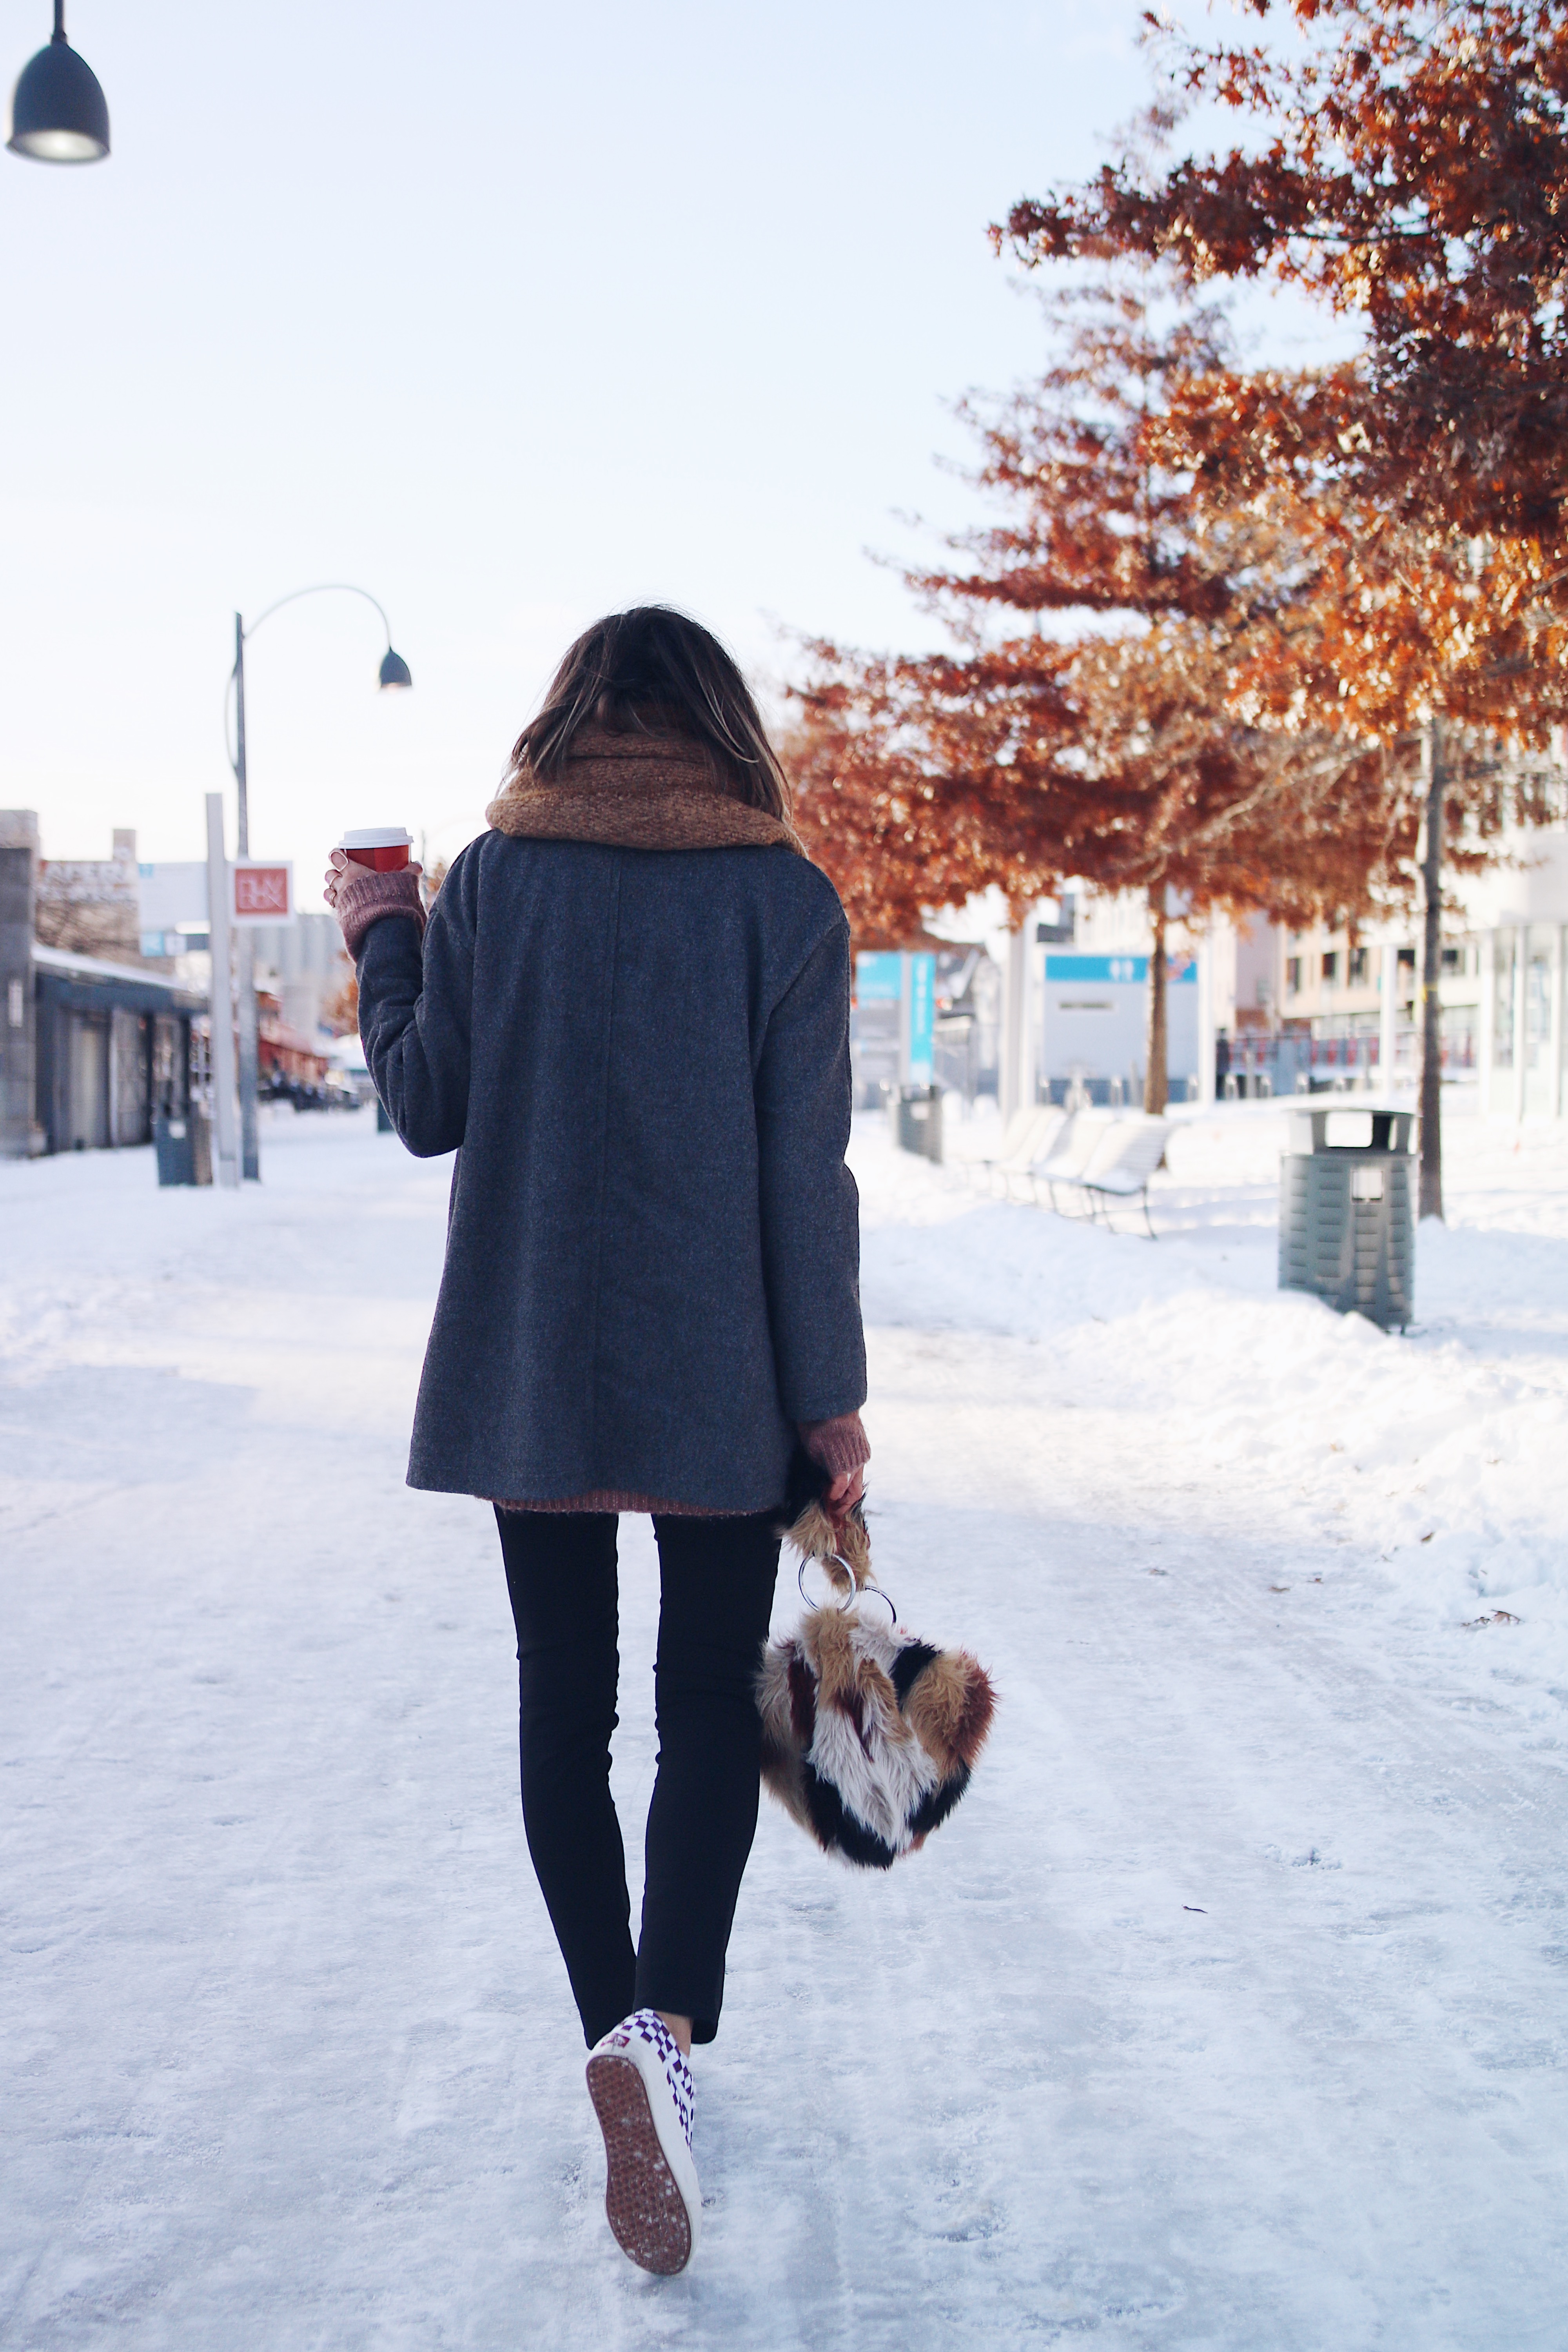 WINTER OUTFIT IN MONTREAL